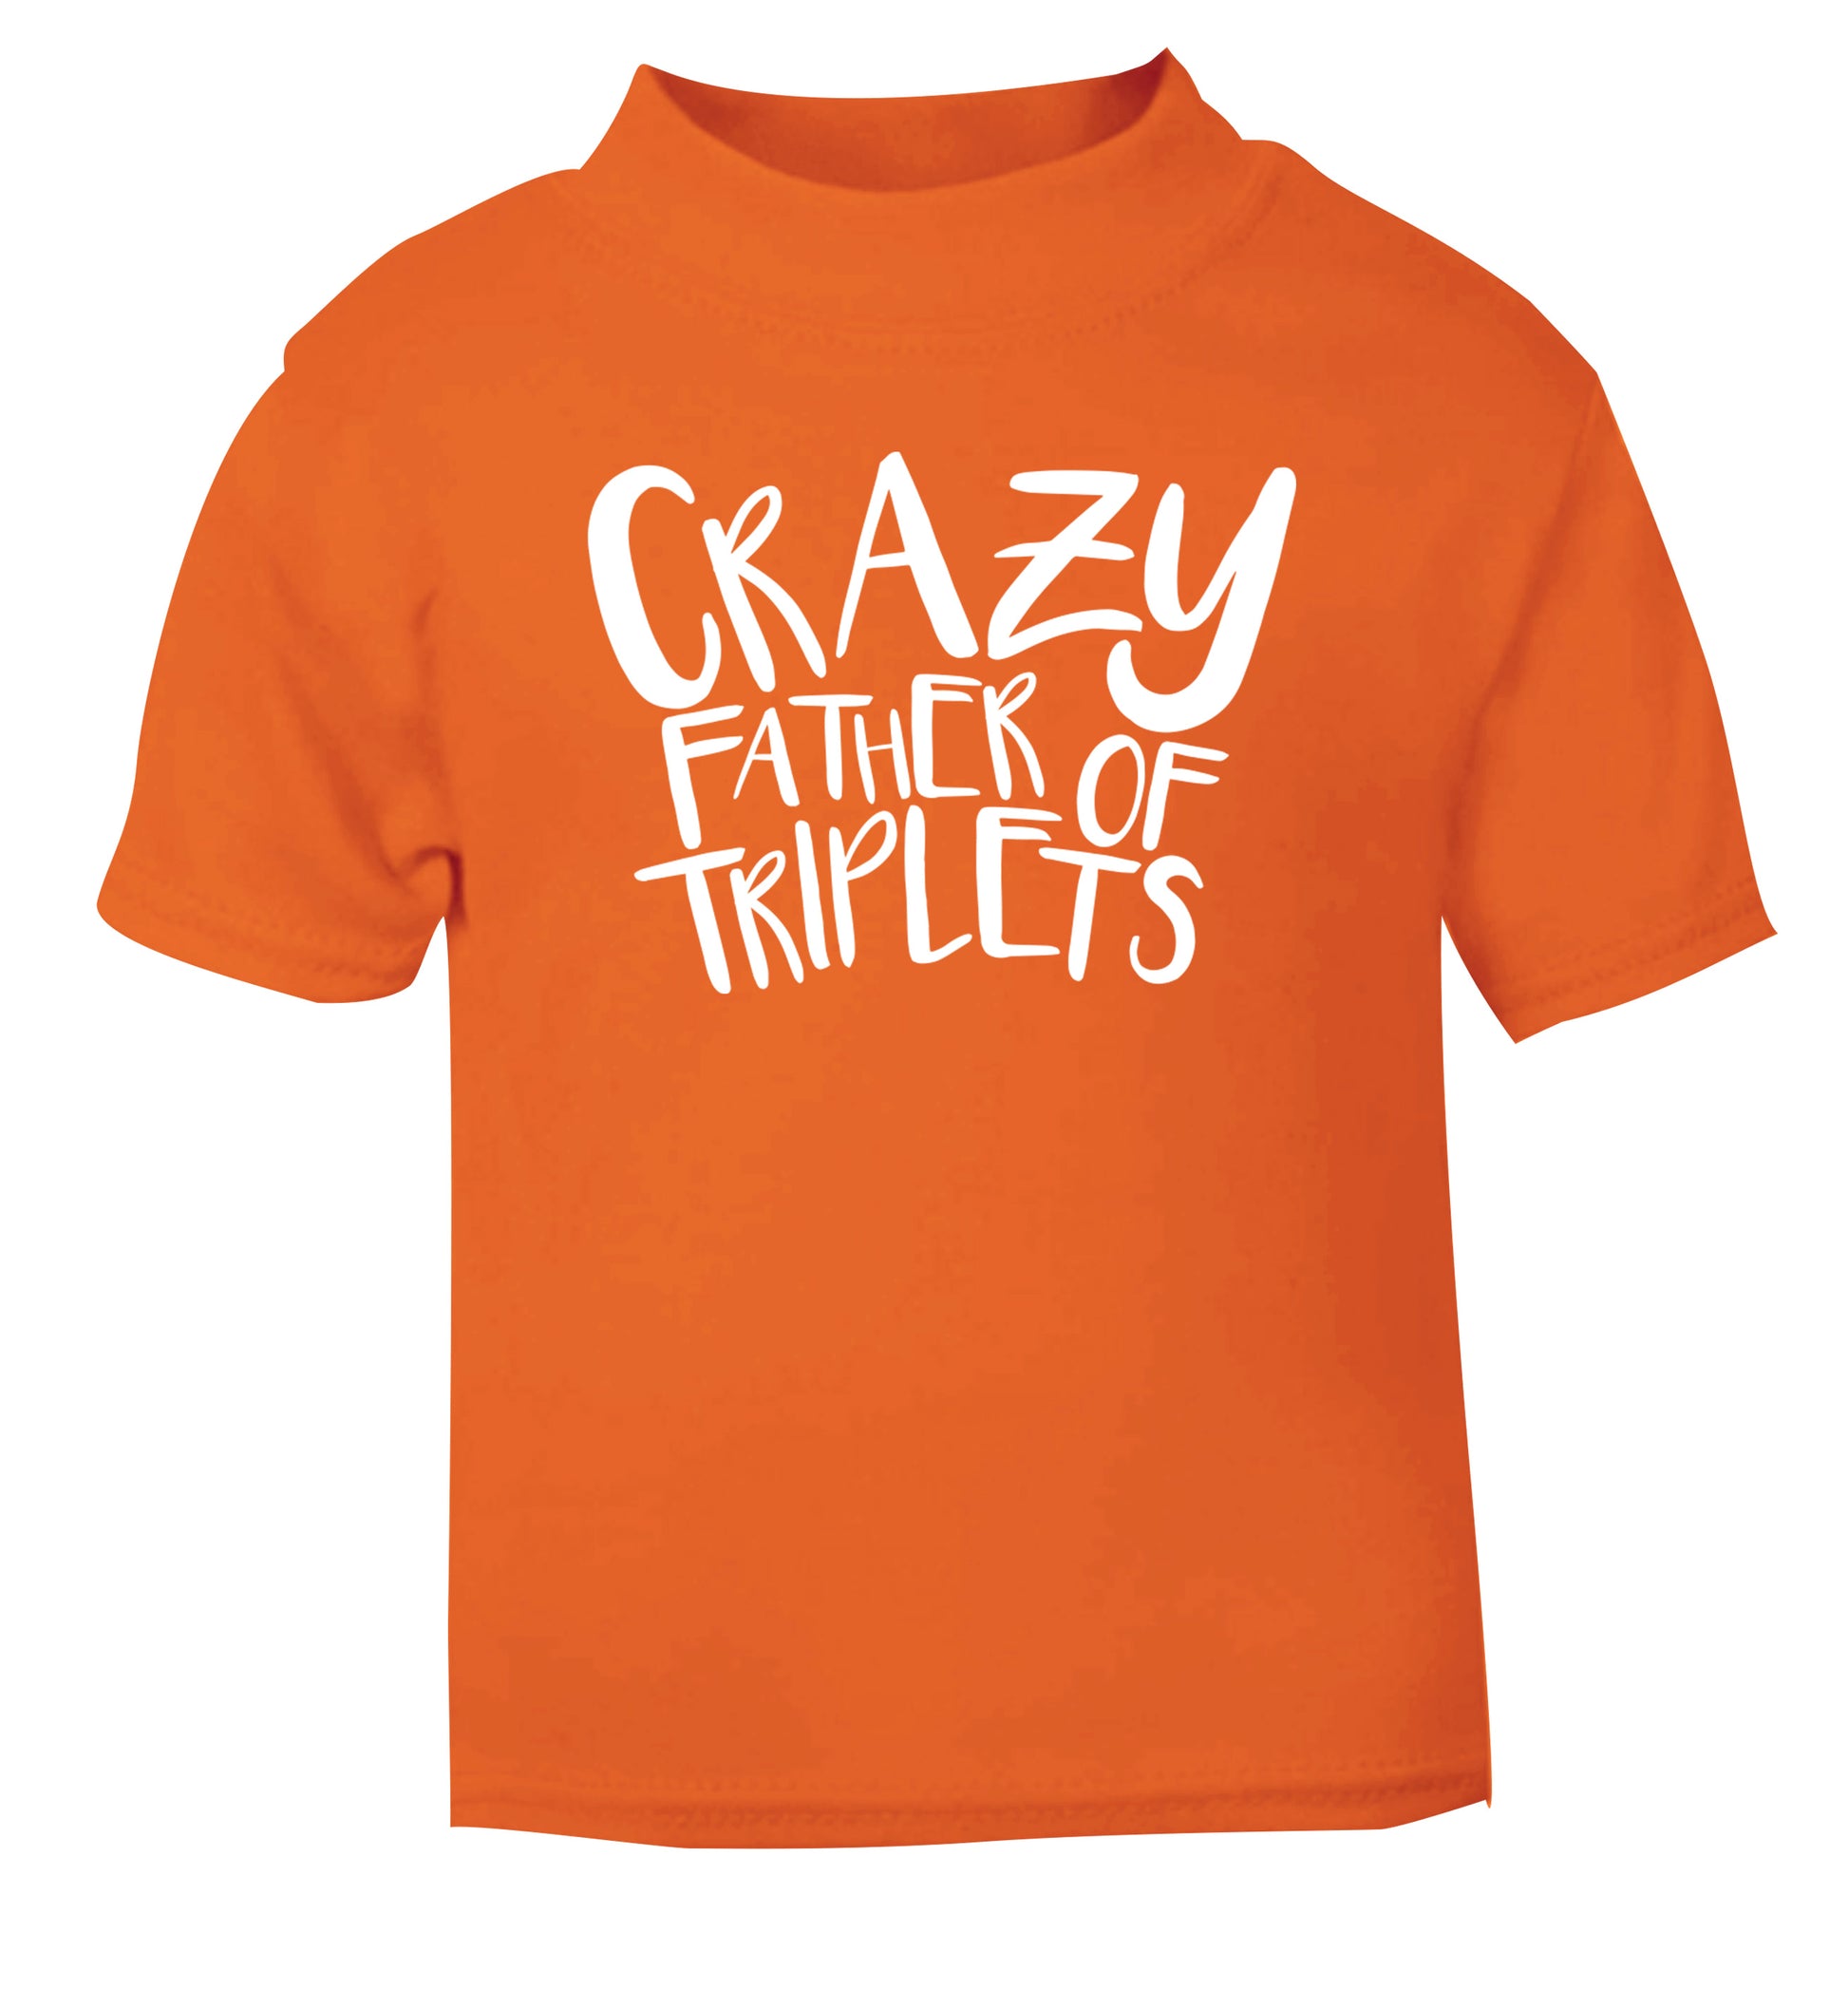 Crazy father of triplets orange Baby Toddler Tshirt 2 Years